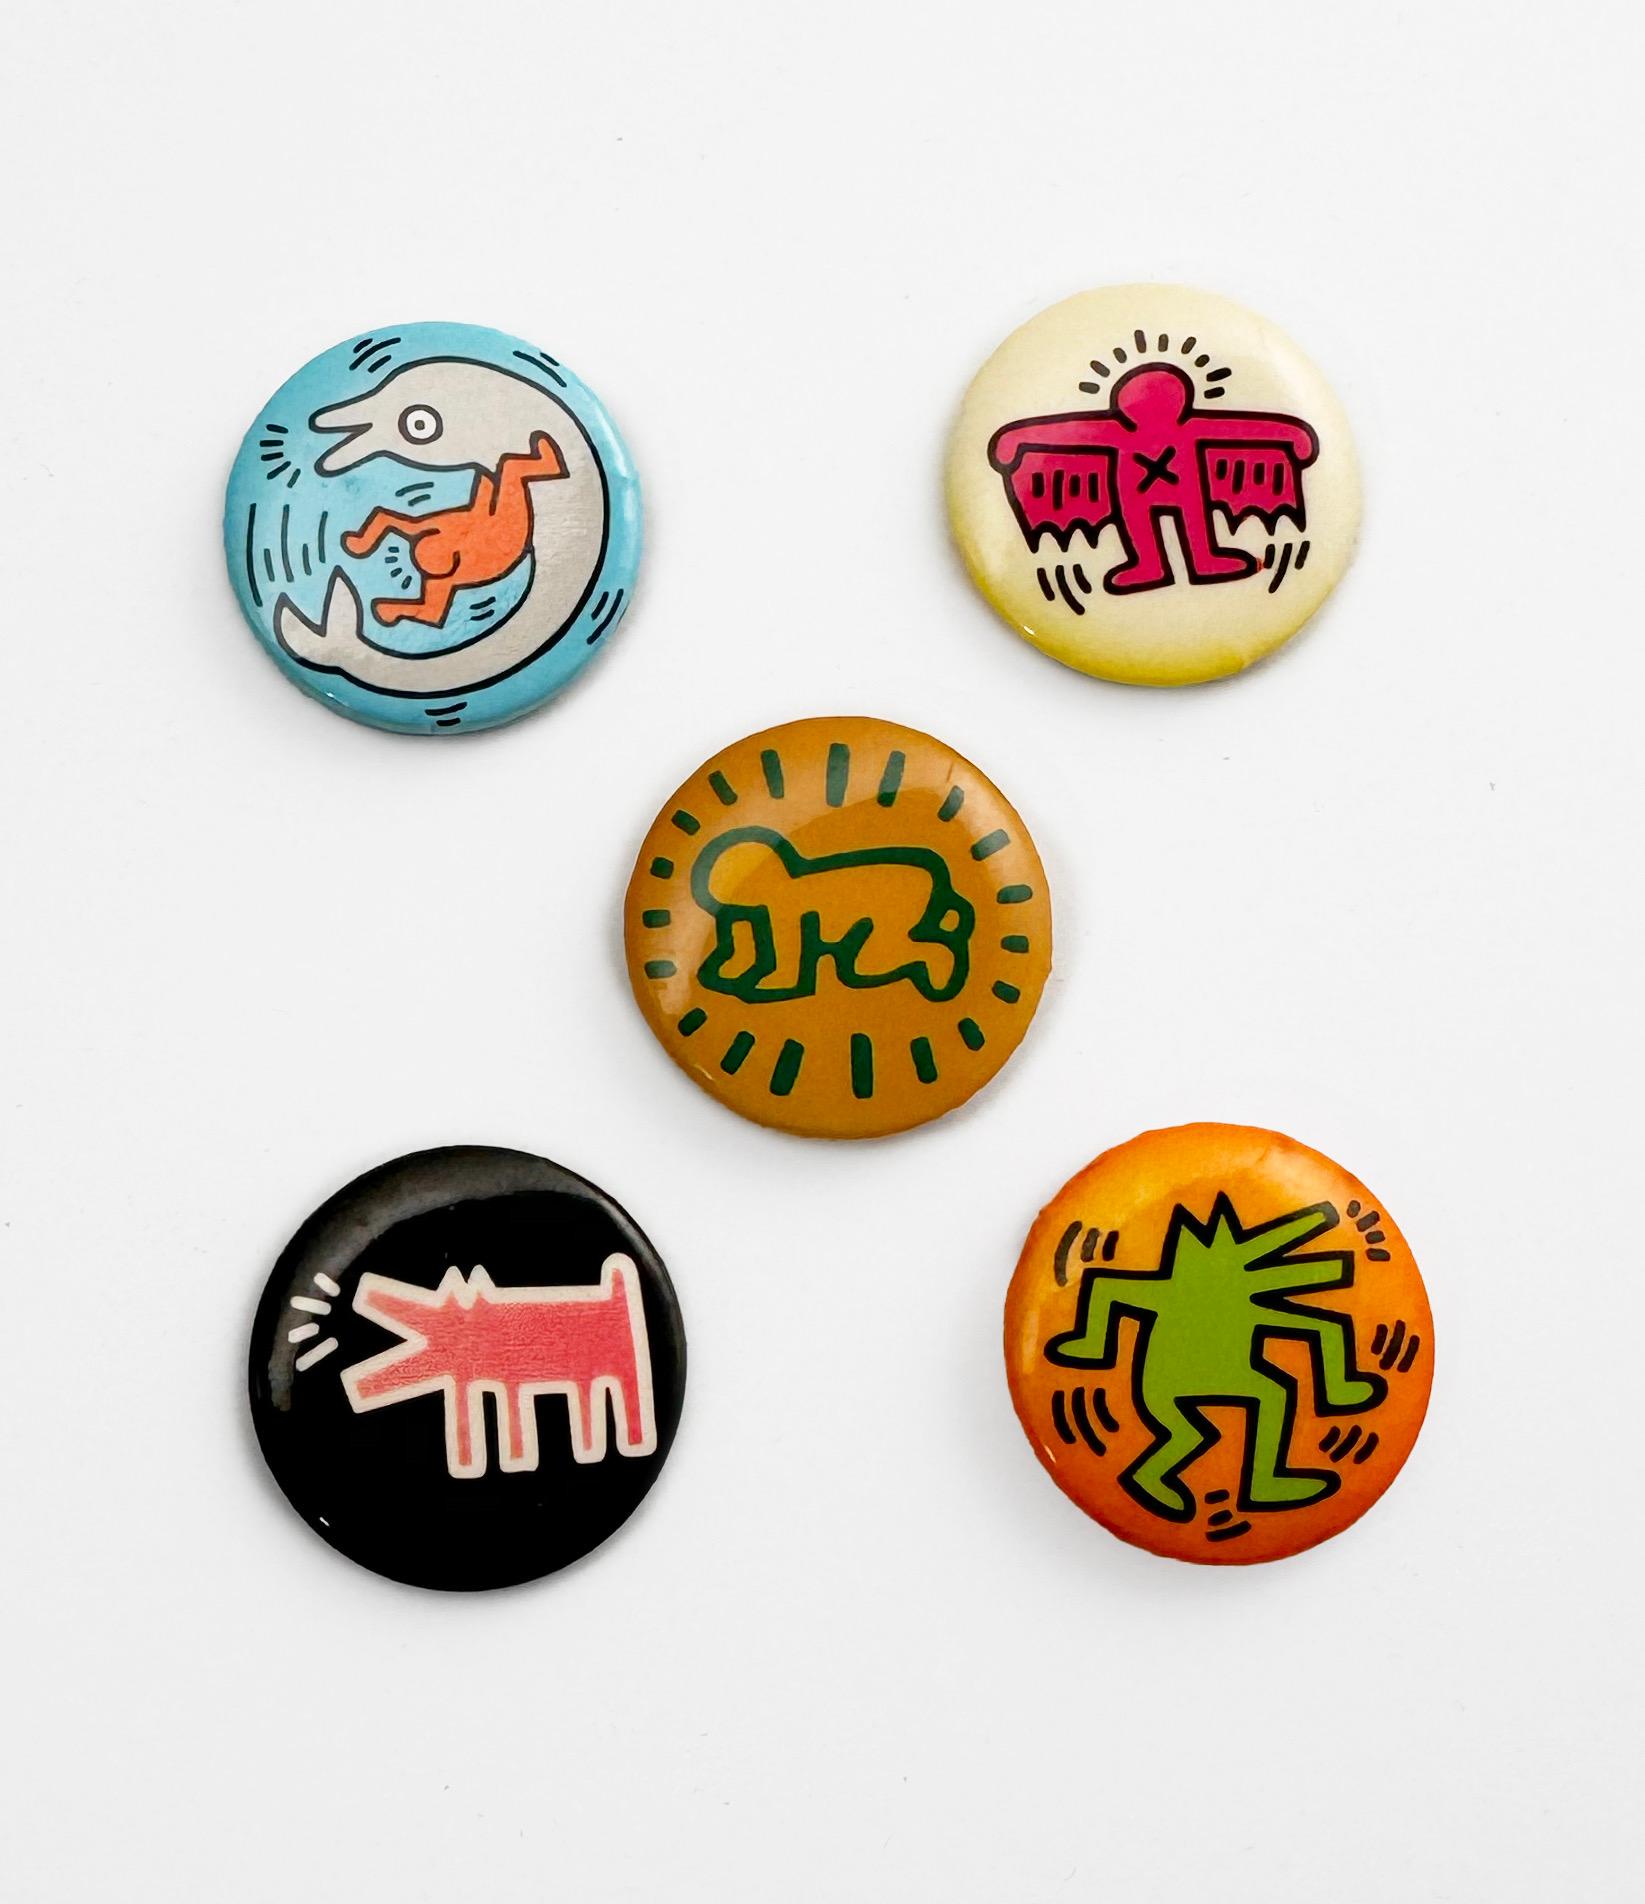 A set of 5 vintage Keith Haring Pop Shop lapel pins, circa 1986-1987 featuring some of the artist's most iconic images.

Original circa mid-1980s (Not later reproductions) 
Small coin sized pins in good vintage condition

Pop Shop History:
In